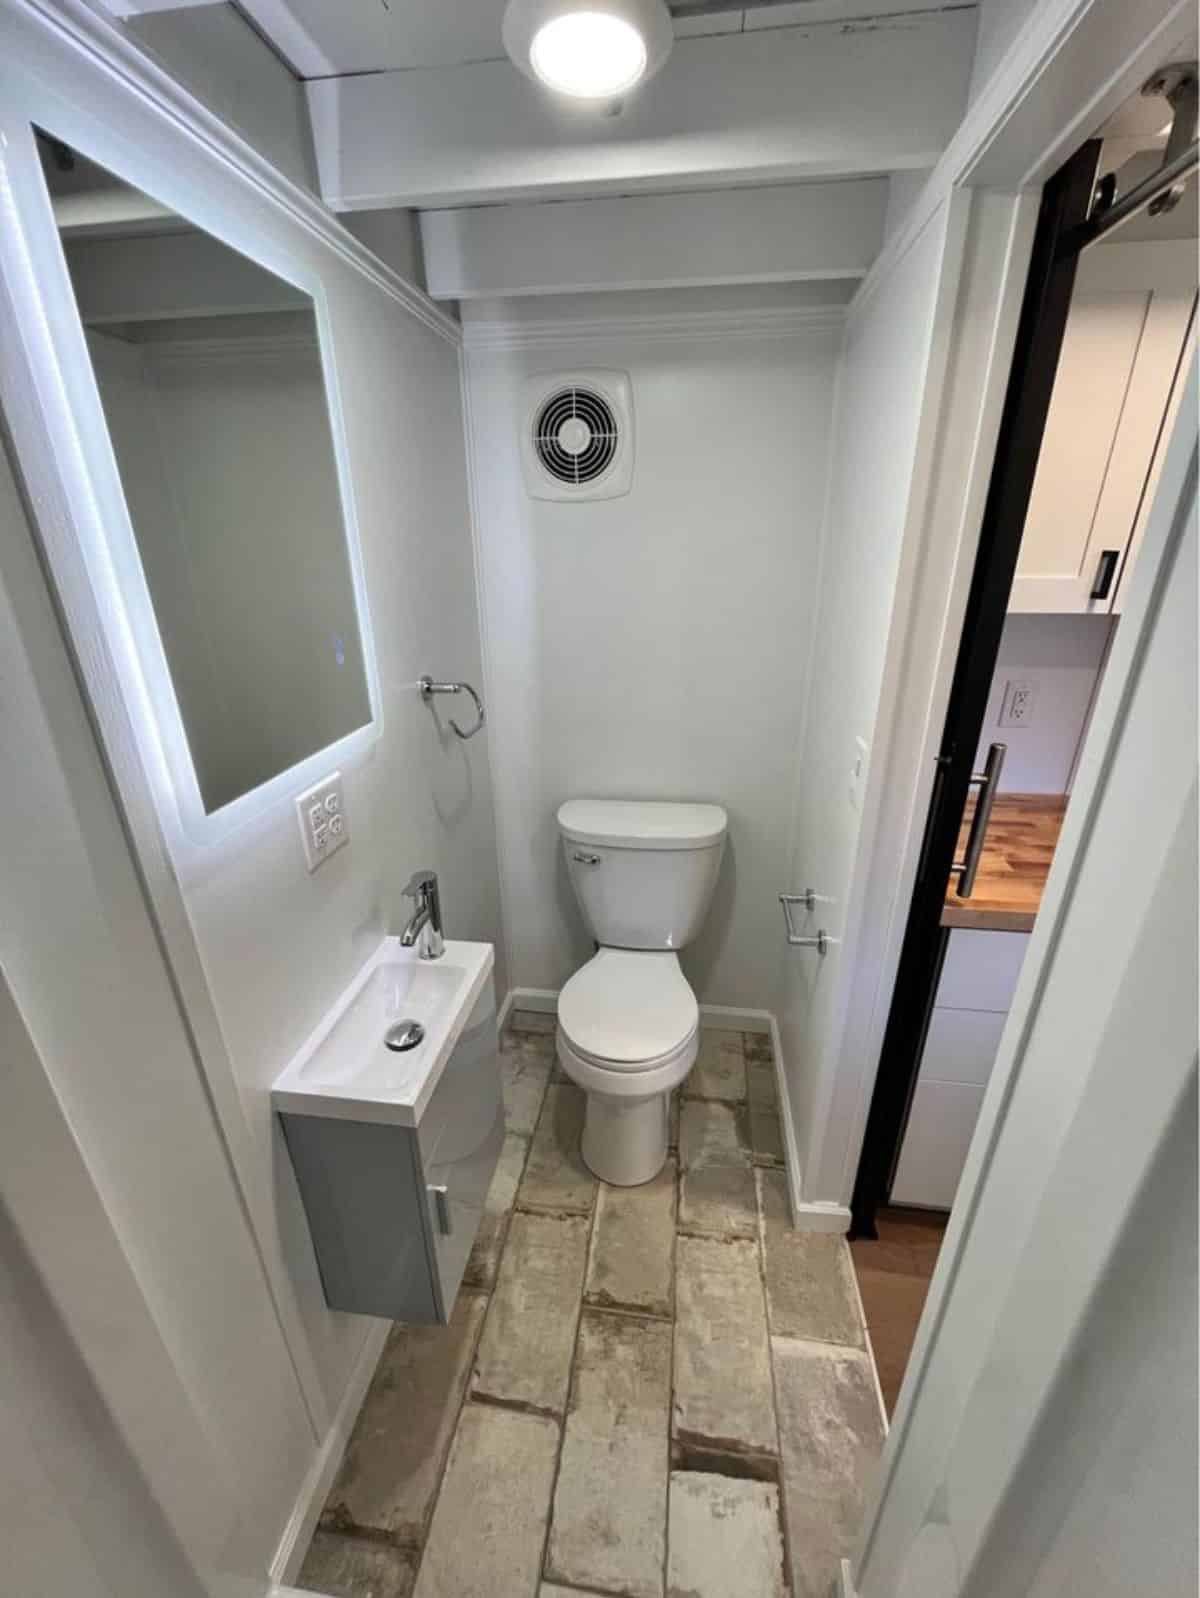 Standard toilet with small sink and vanity